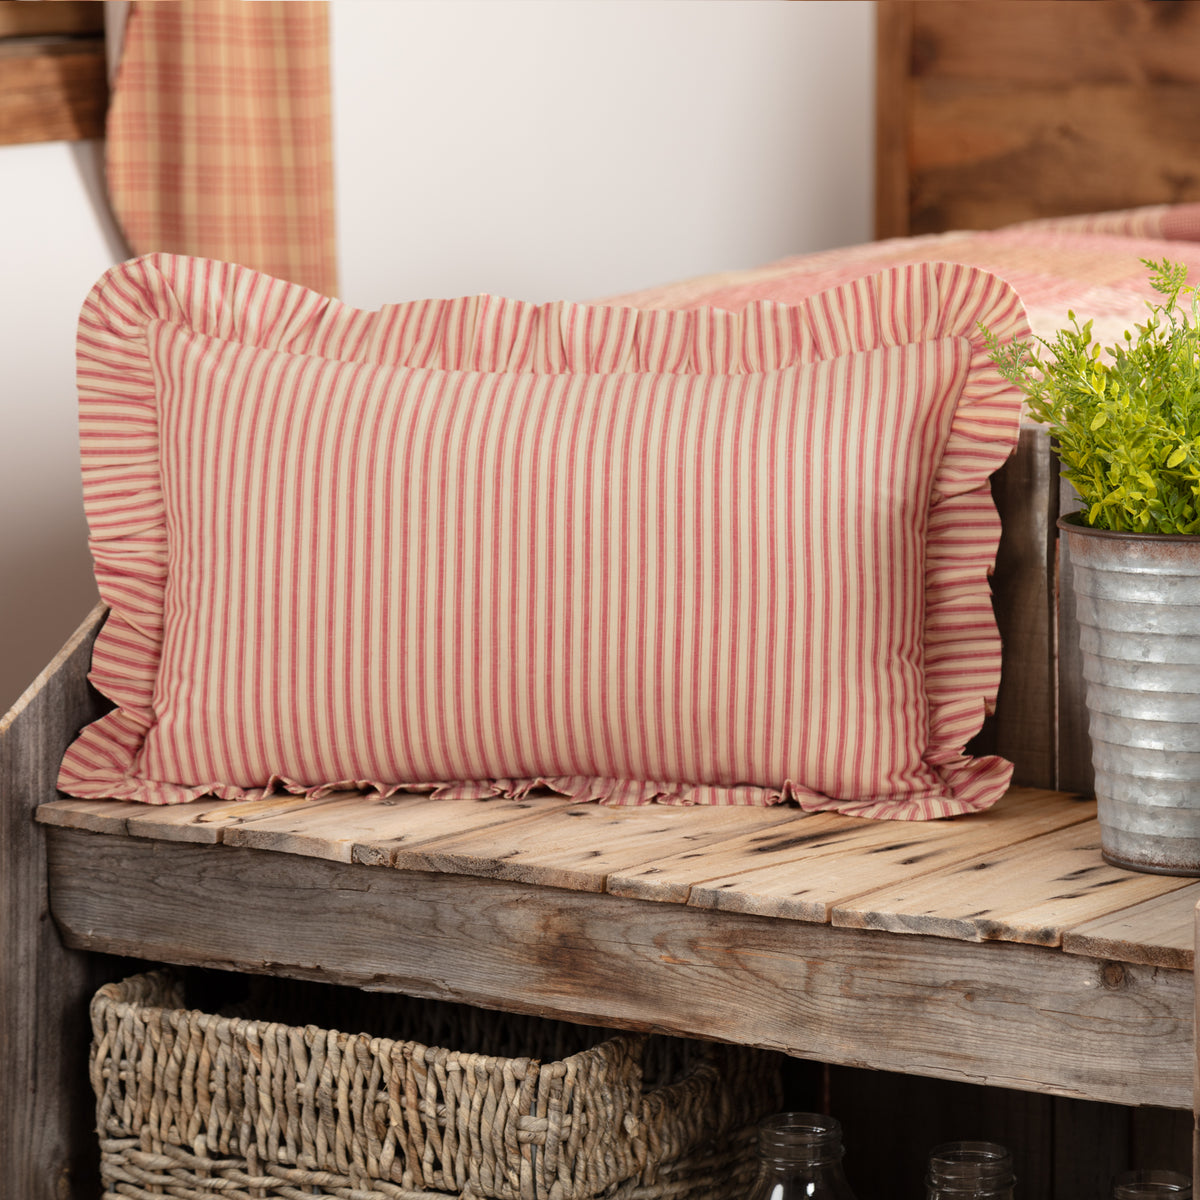 April & Olive Sawyer Mill Red Ticking Stripe Fabric Pillow Cover 14x22 By VHC Brands